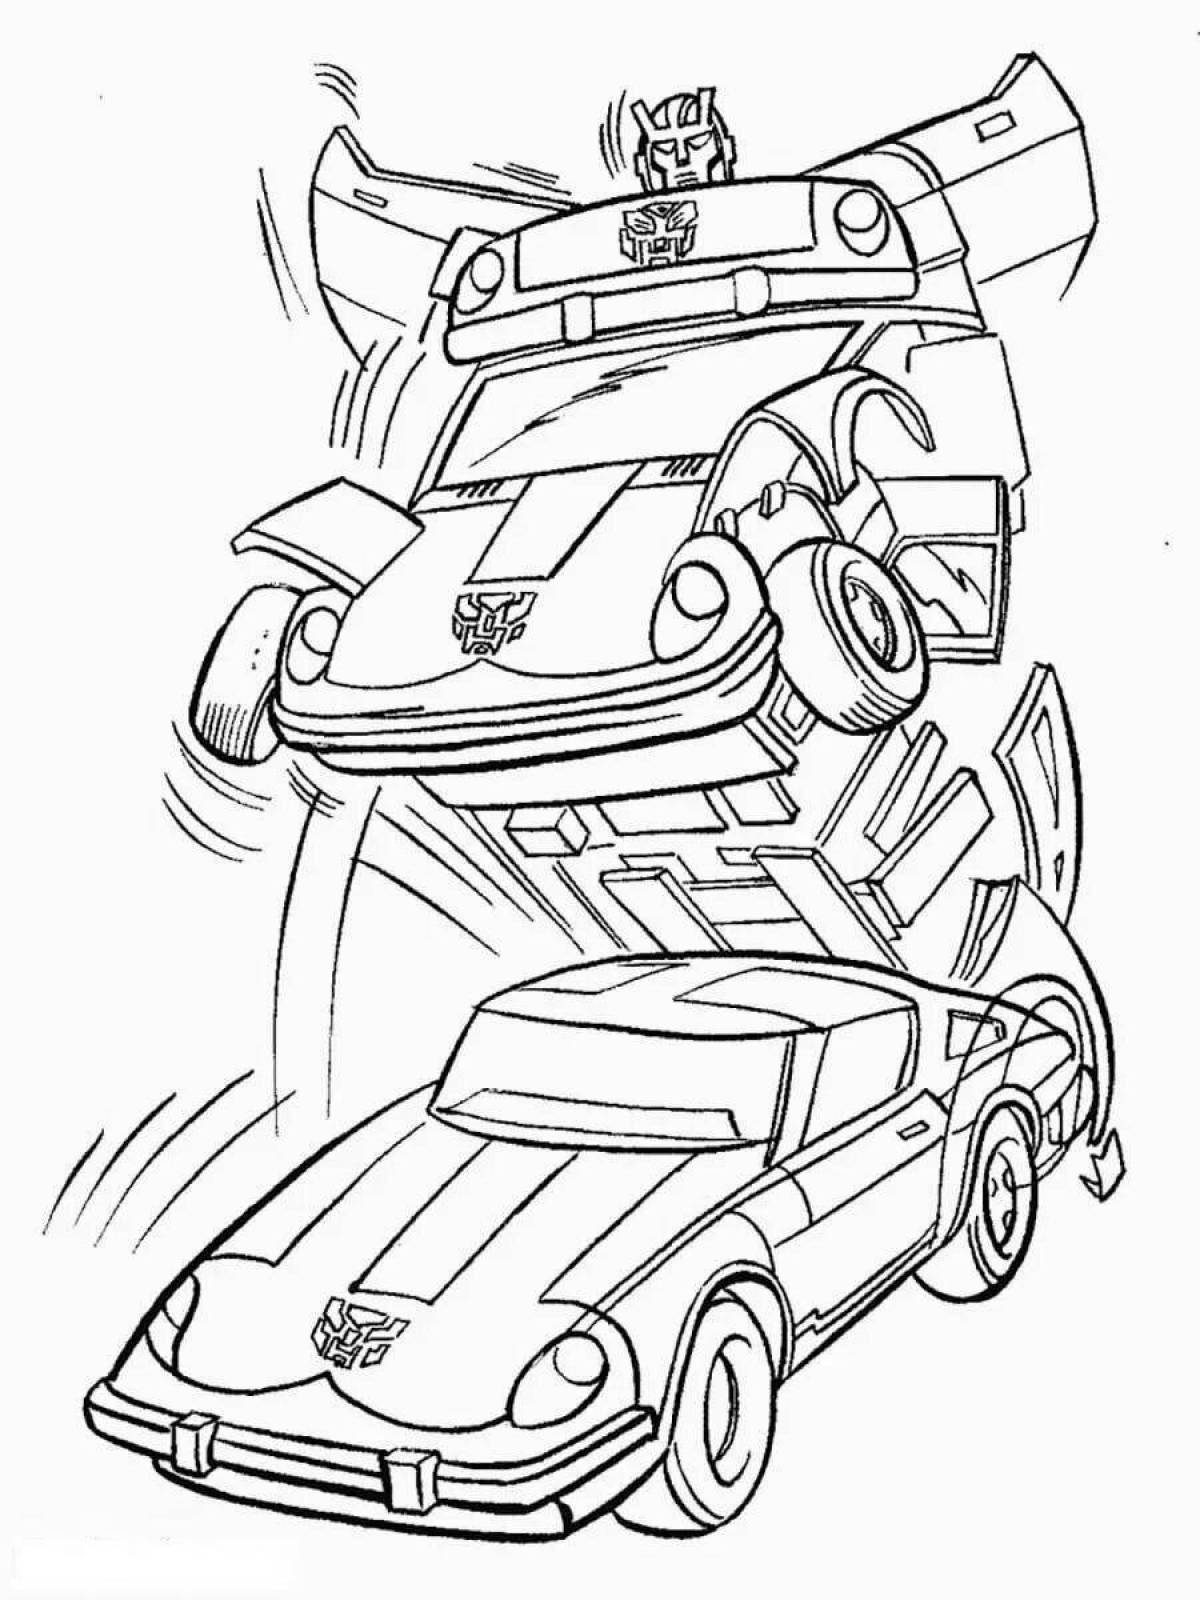 Fancy bumblebee robot coloring page